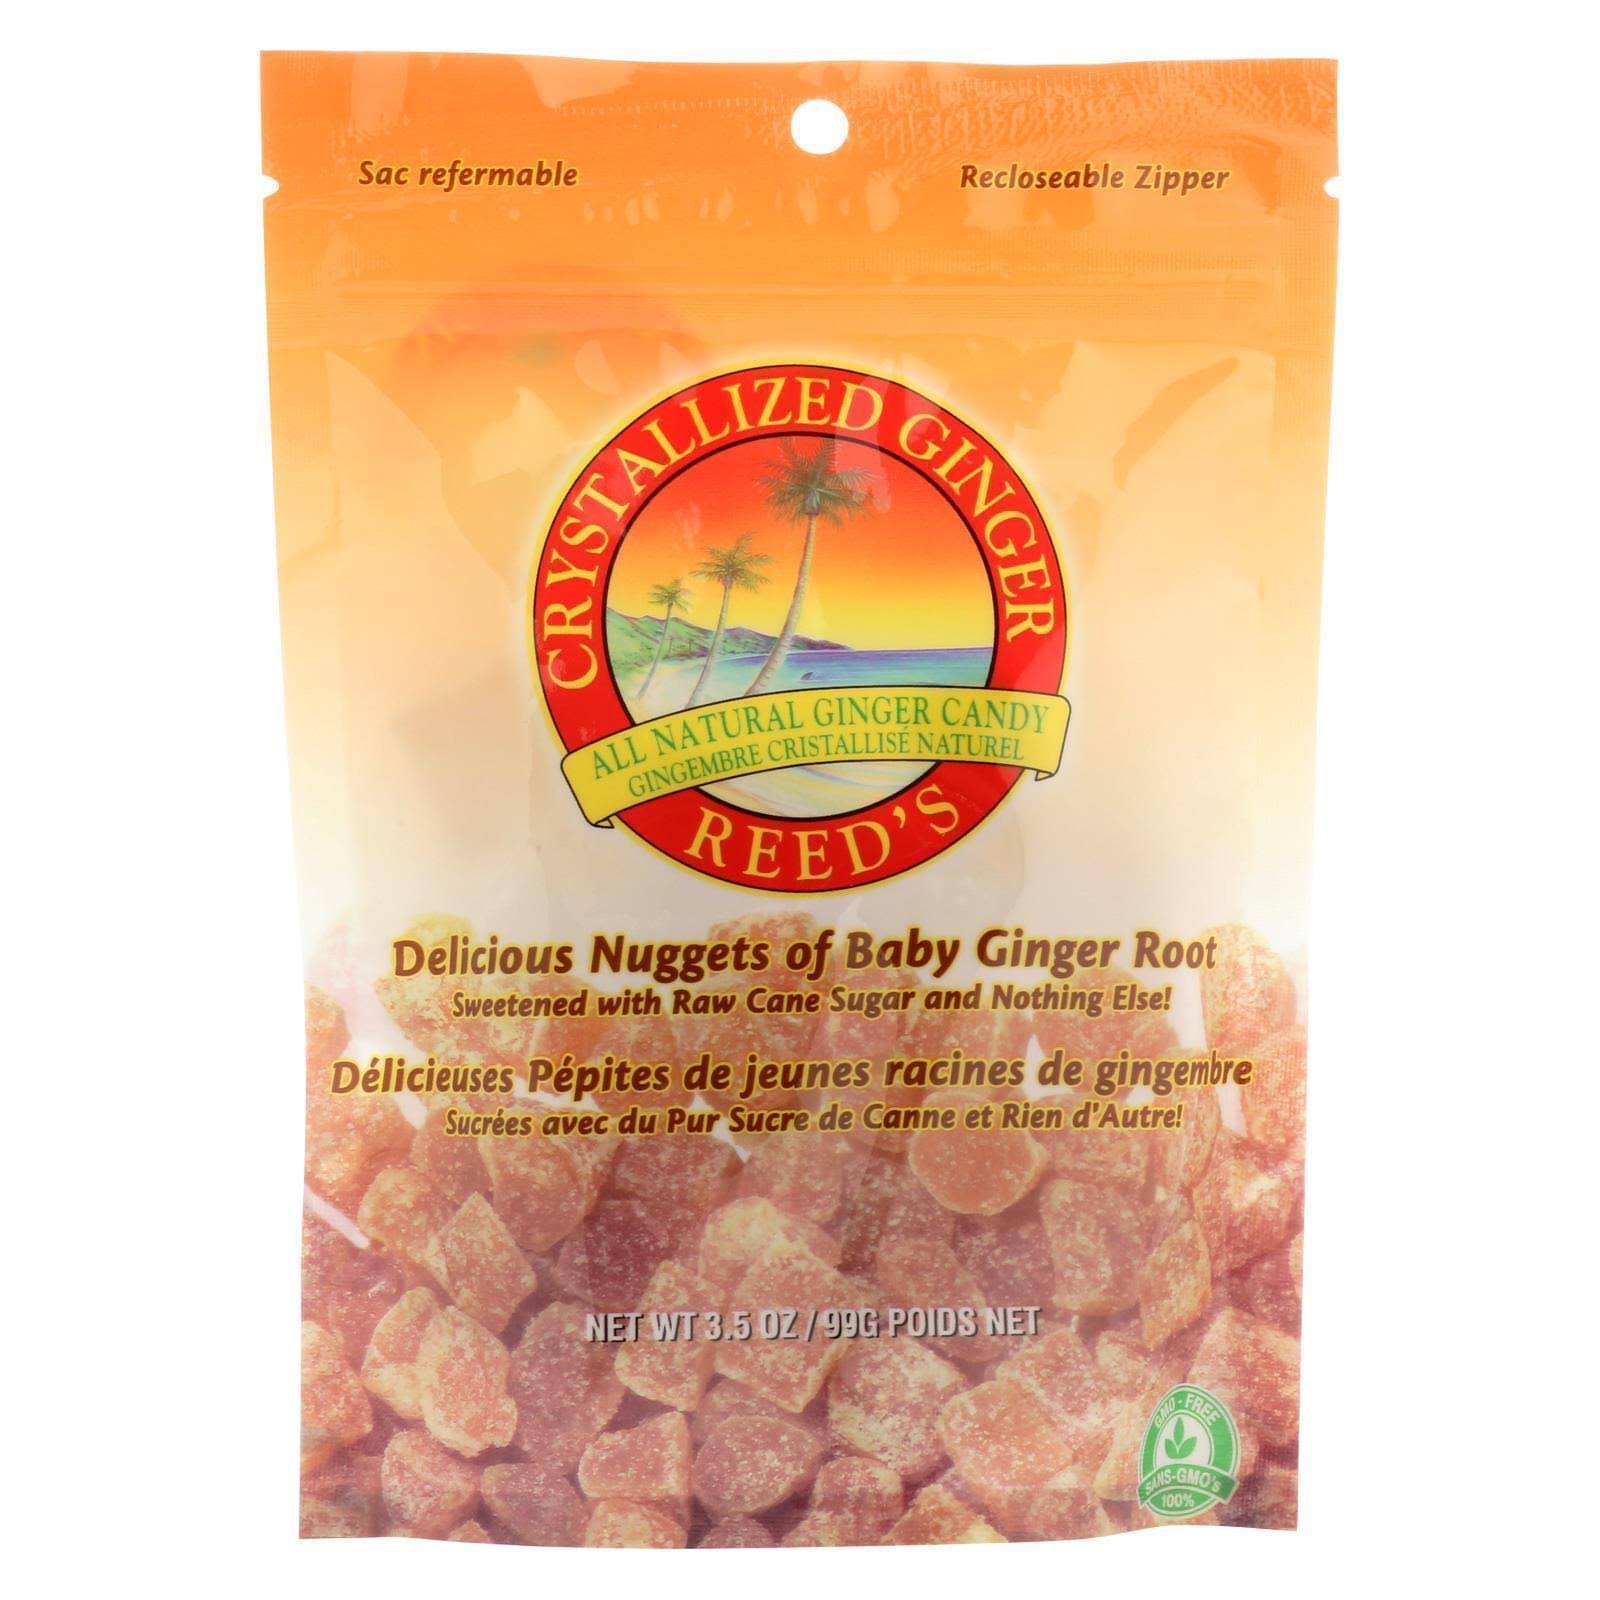 Reed's: Crystallized Ginger Candy, 3.5 Oz